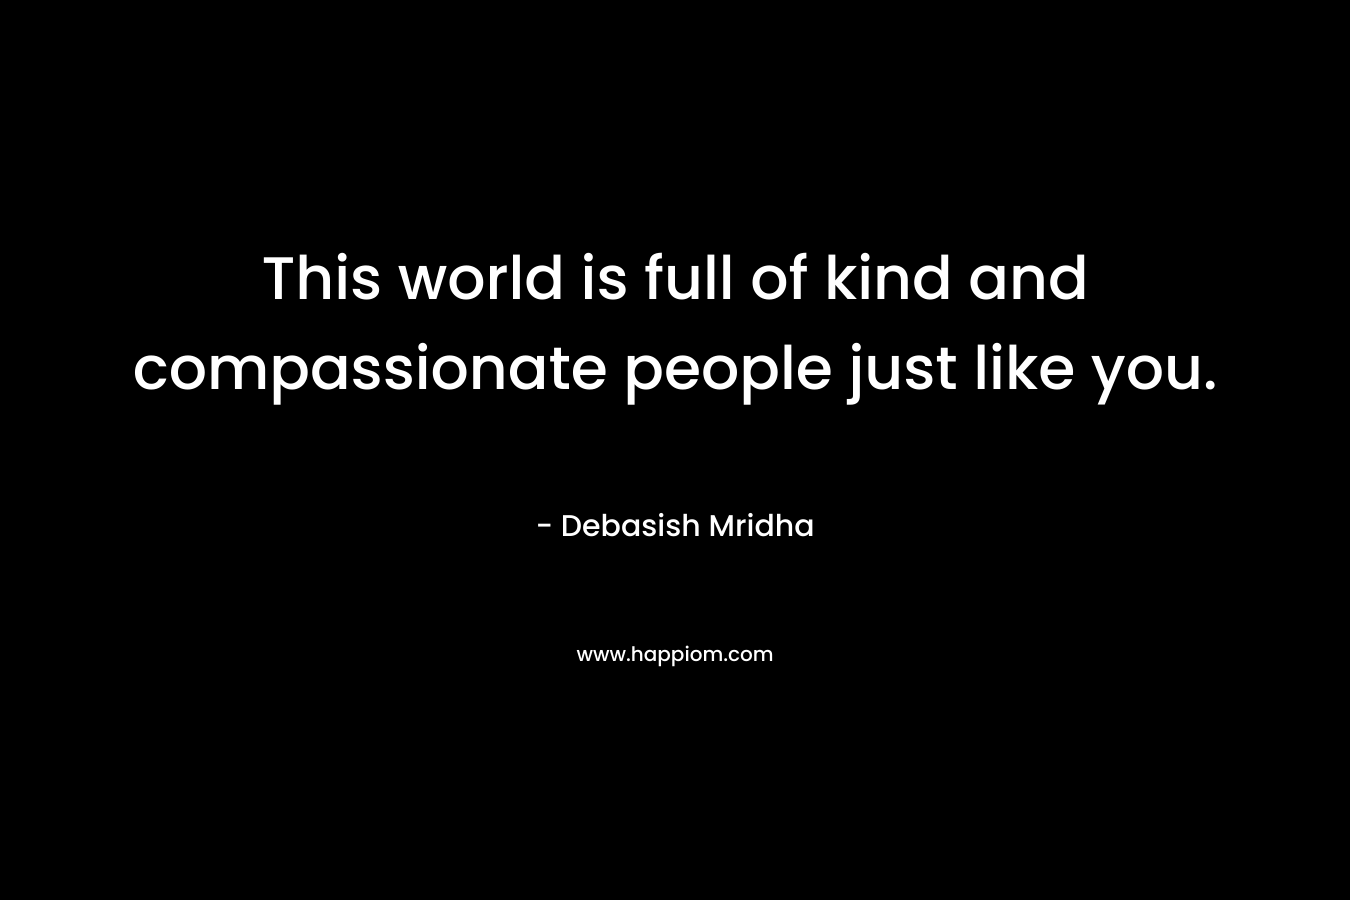 This world is full of kind and compassionate people just like you.